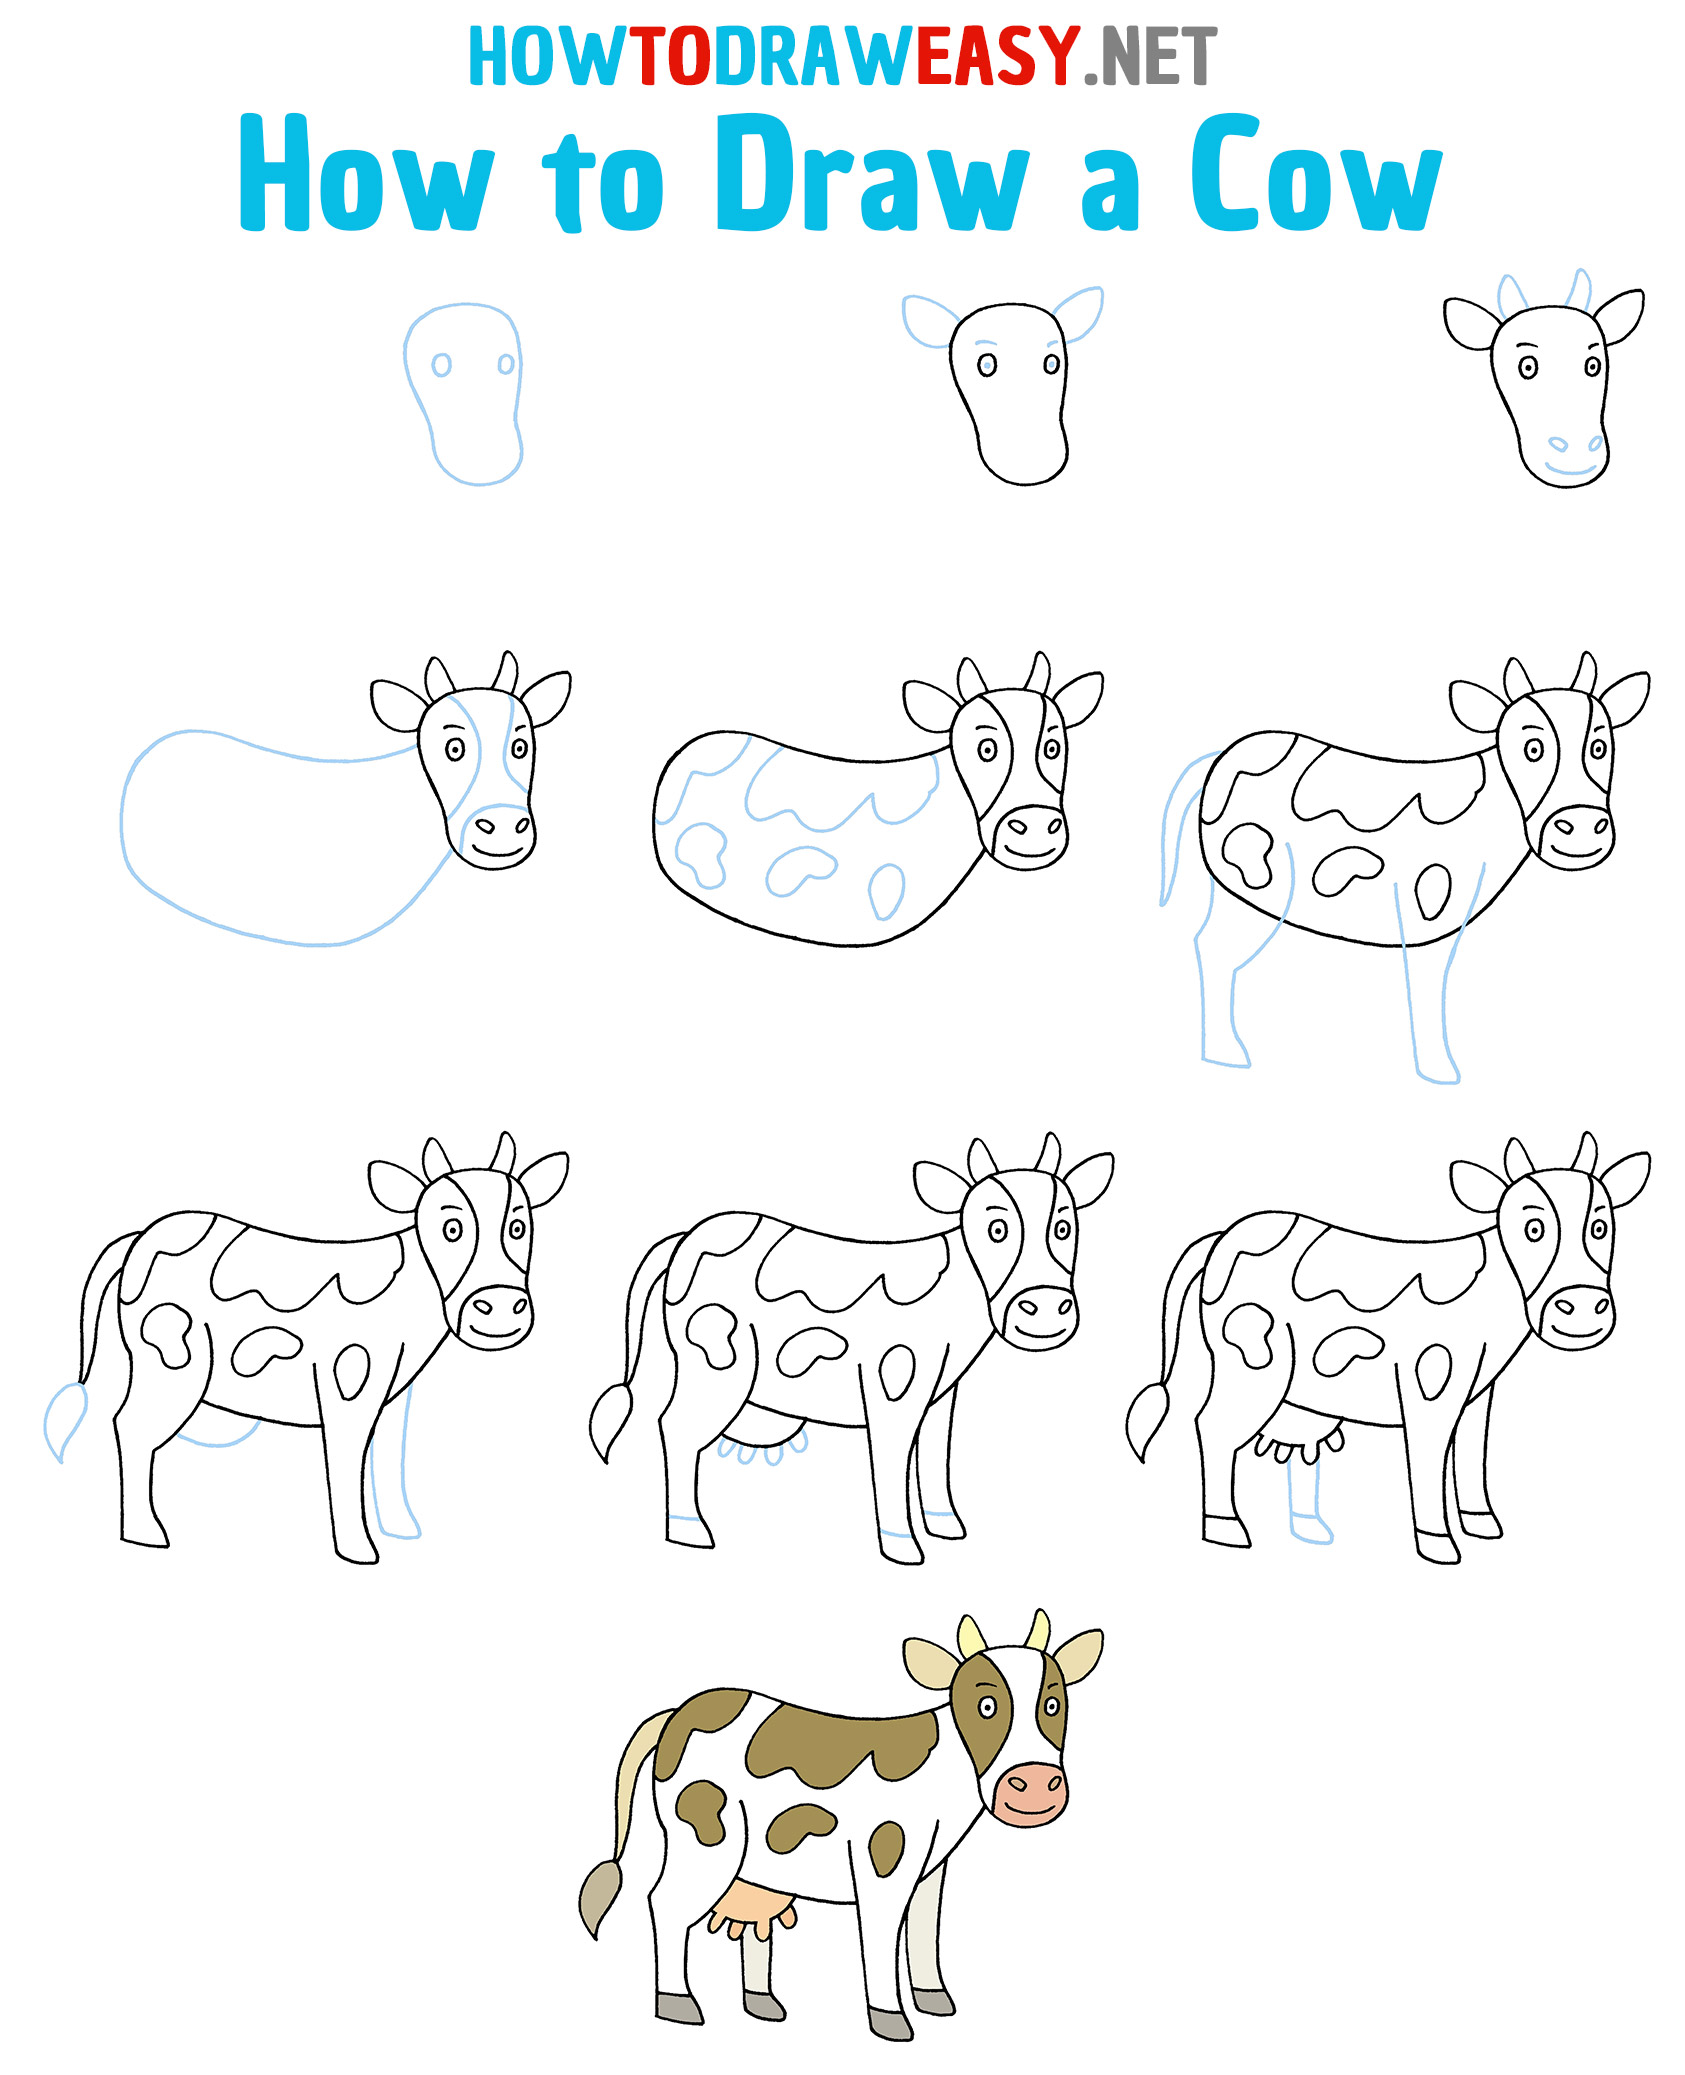 How to Draw a Cow Step by Step